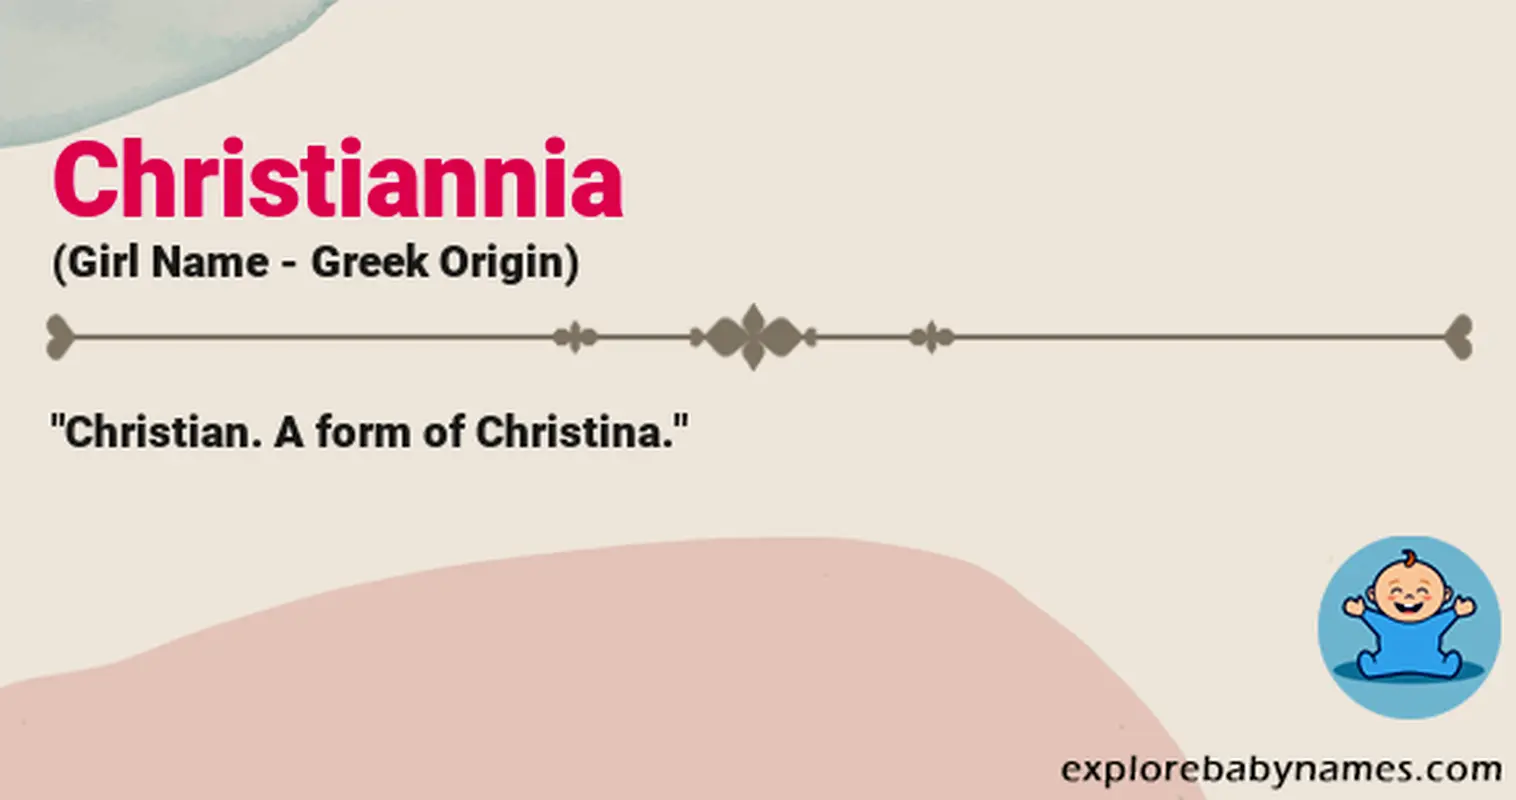 Meaning of Christiannia